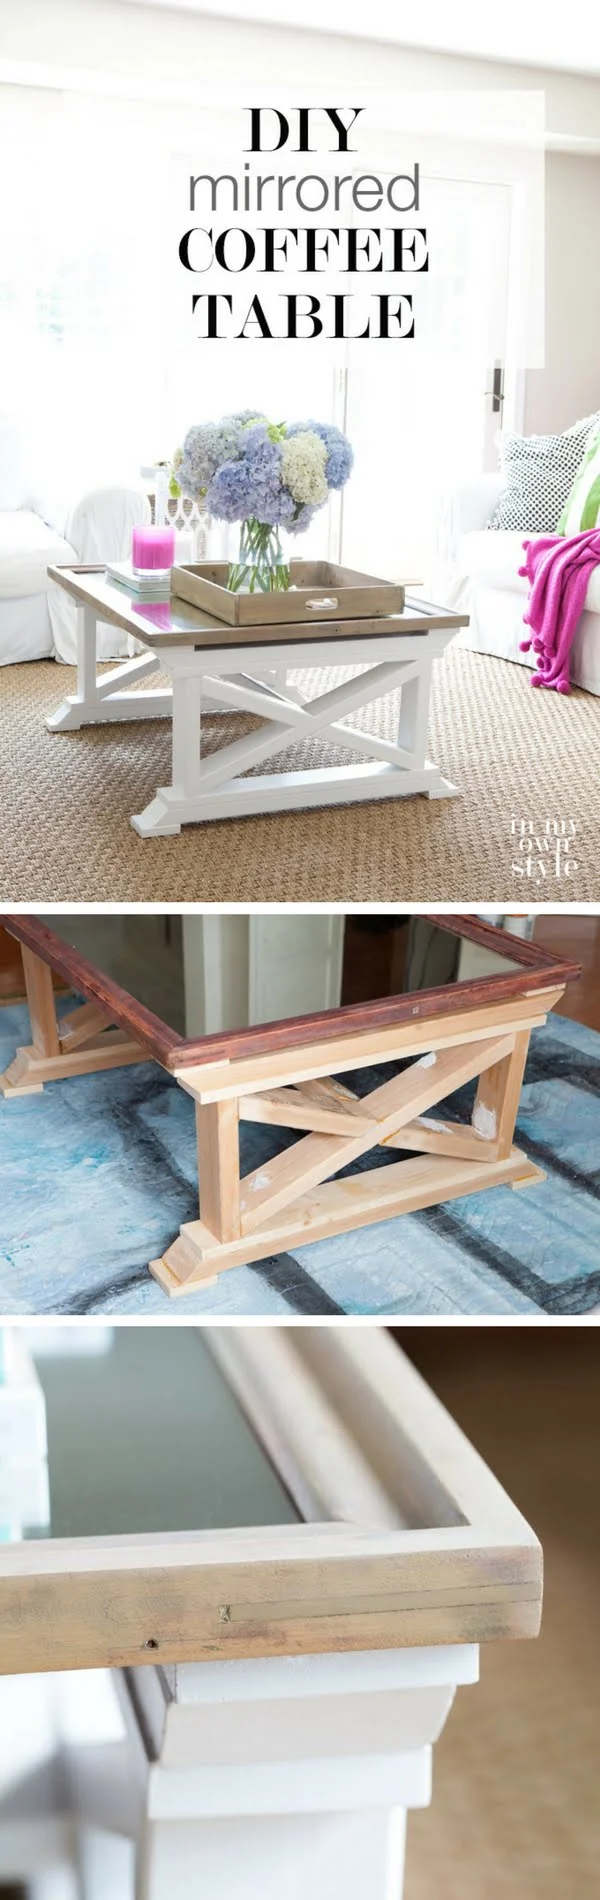 20 Crafty 2x4 DIY Projects That You Can Easily Make - Check out how to make a DIY mirror coffee table from 2x4s